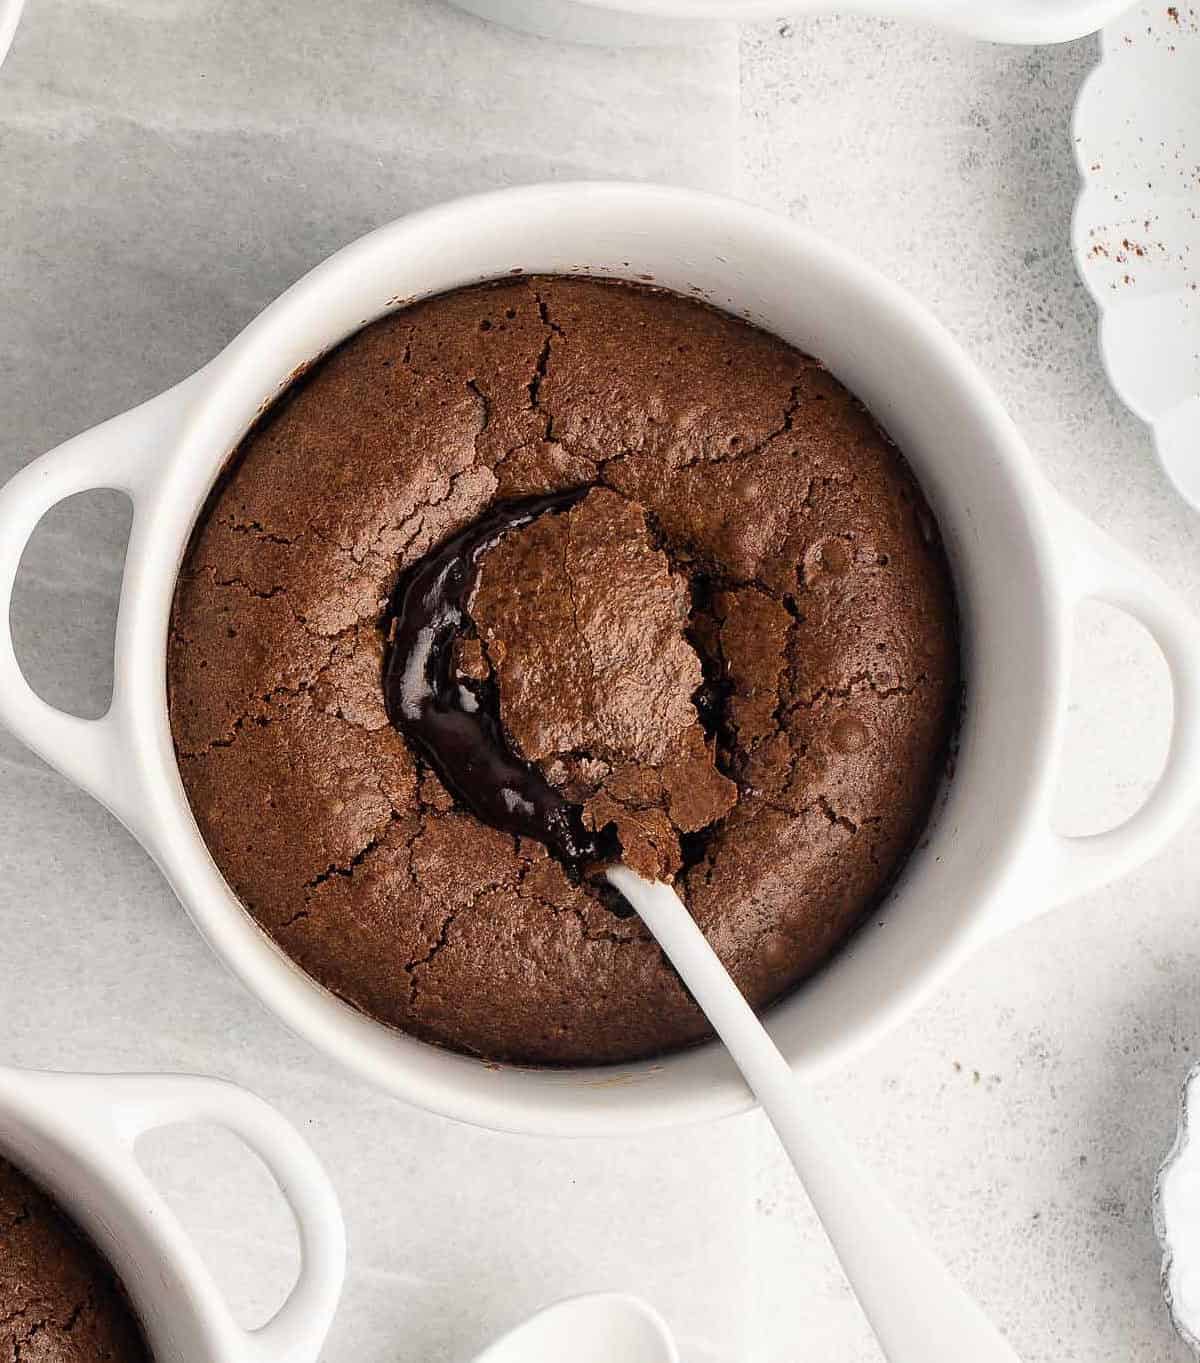  Chocolatey goodness that will satisfy any sweet tooth